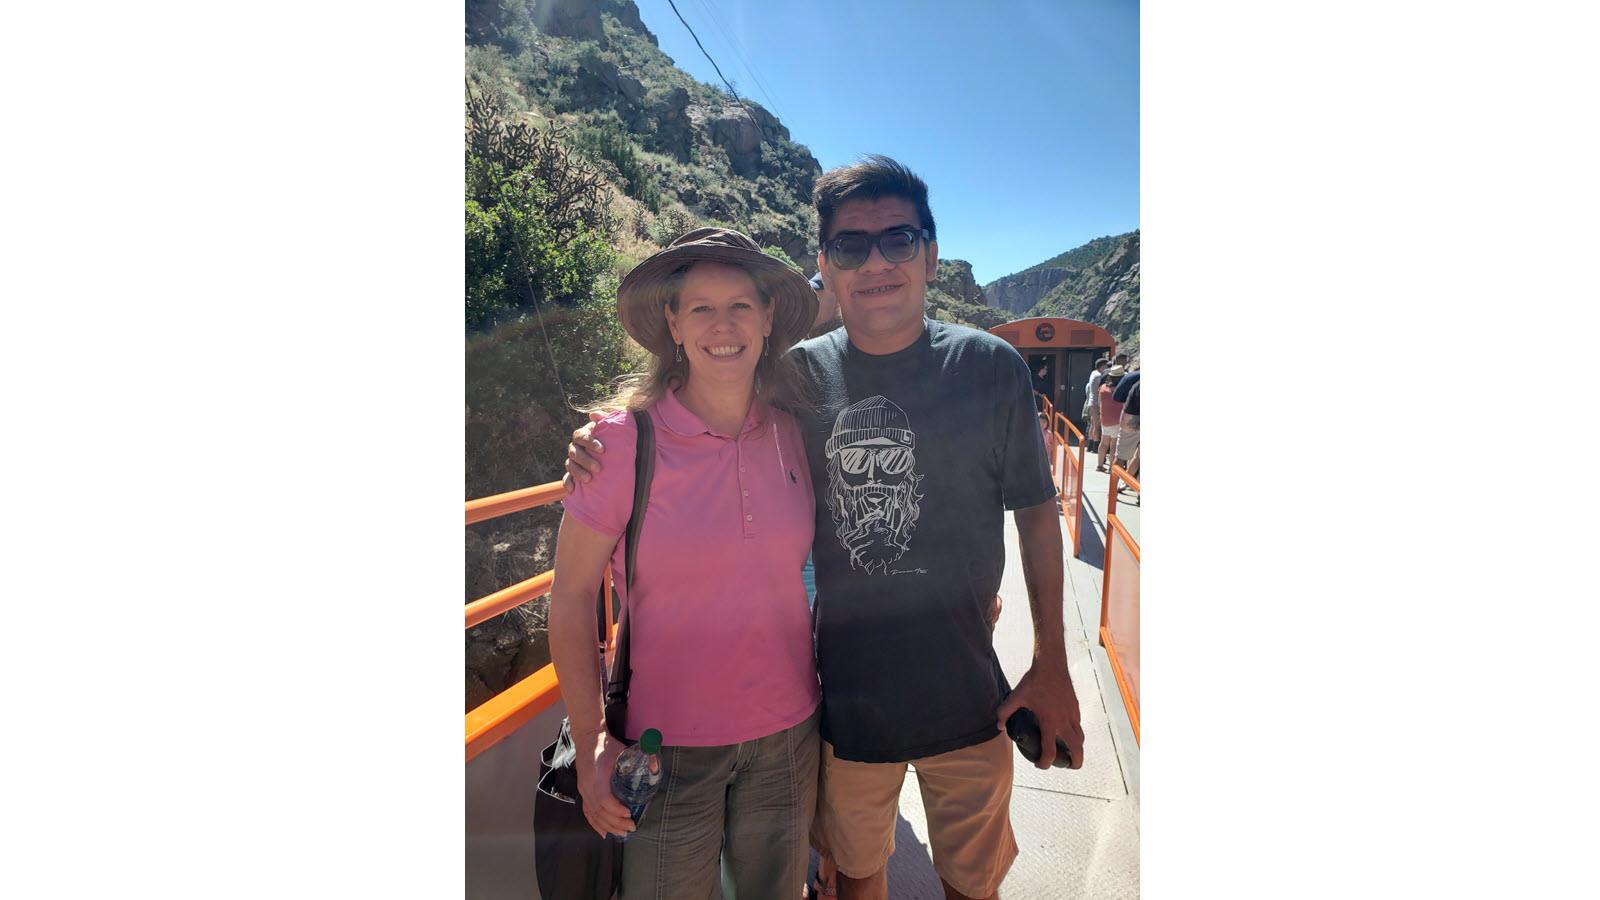 Evren in a black shirt and sunglasses with arm around mom, Kara, in a pink shit and hat outdoors in front of a mountain